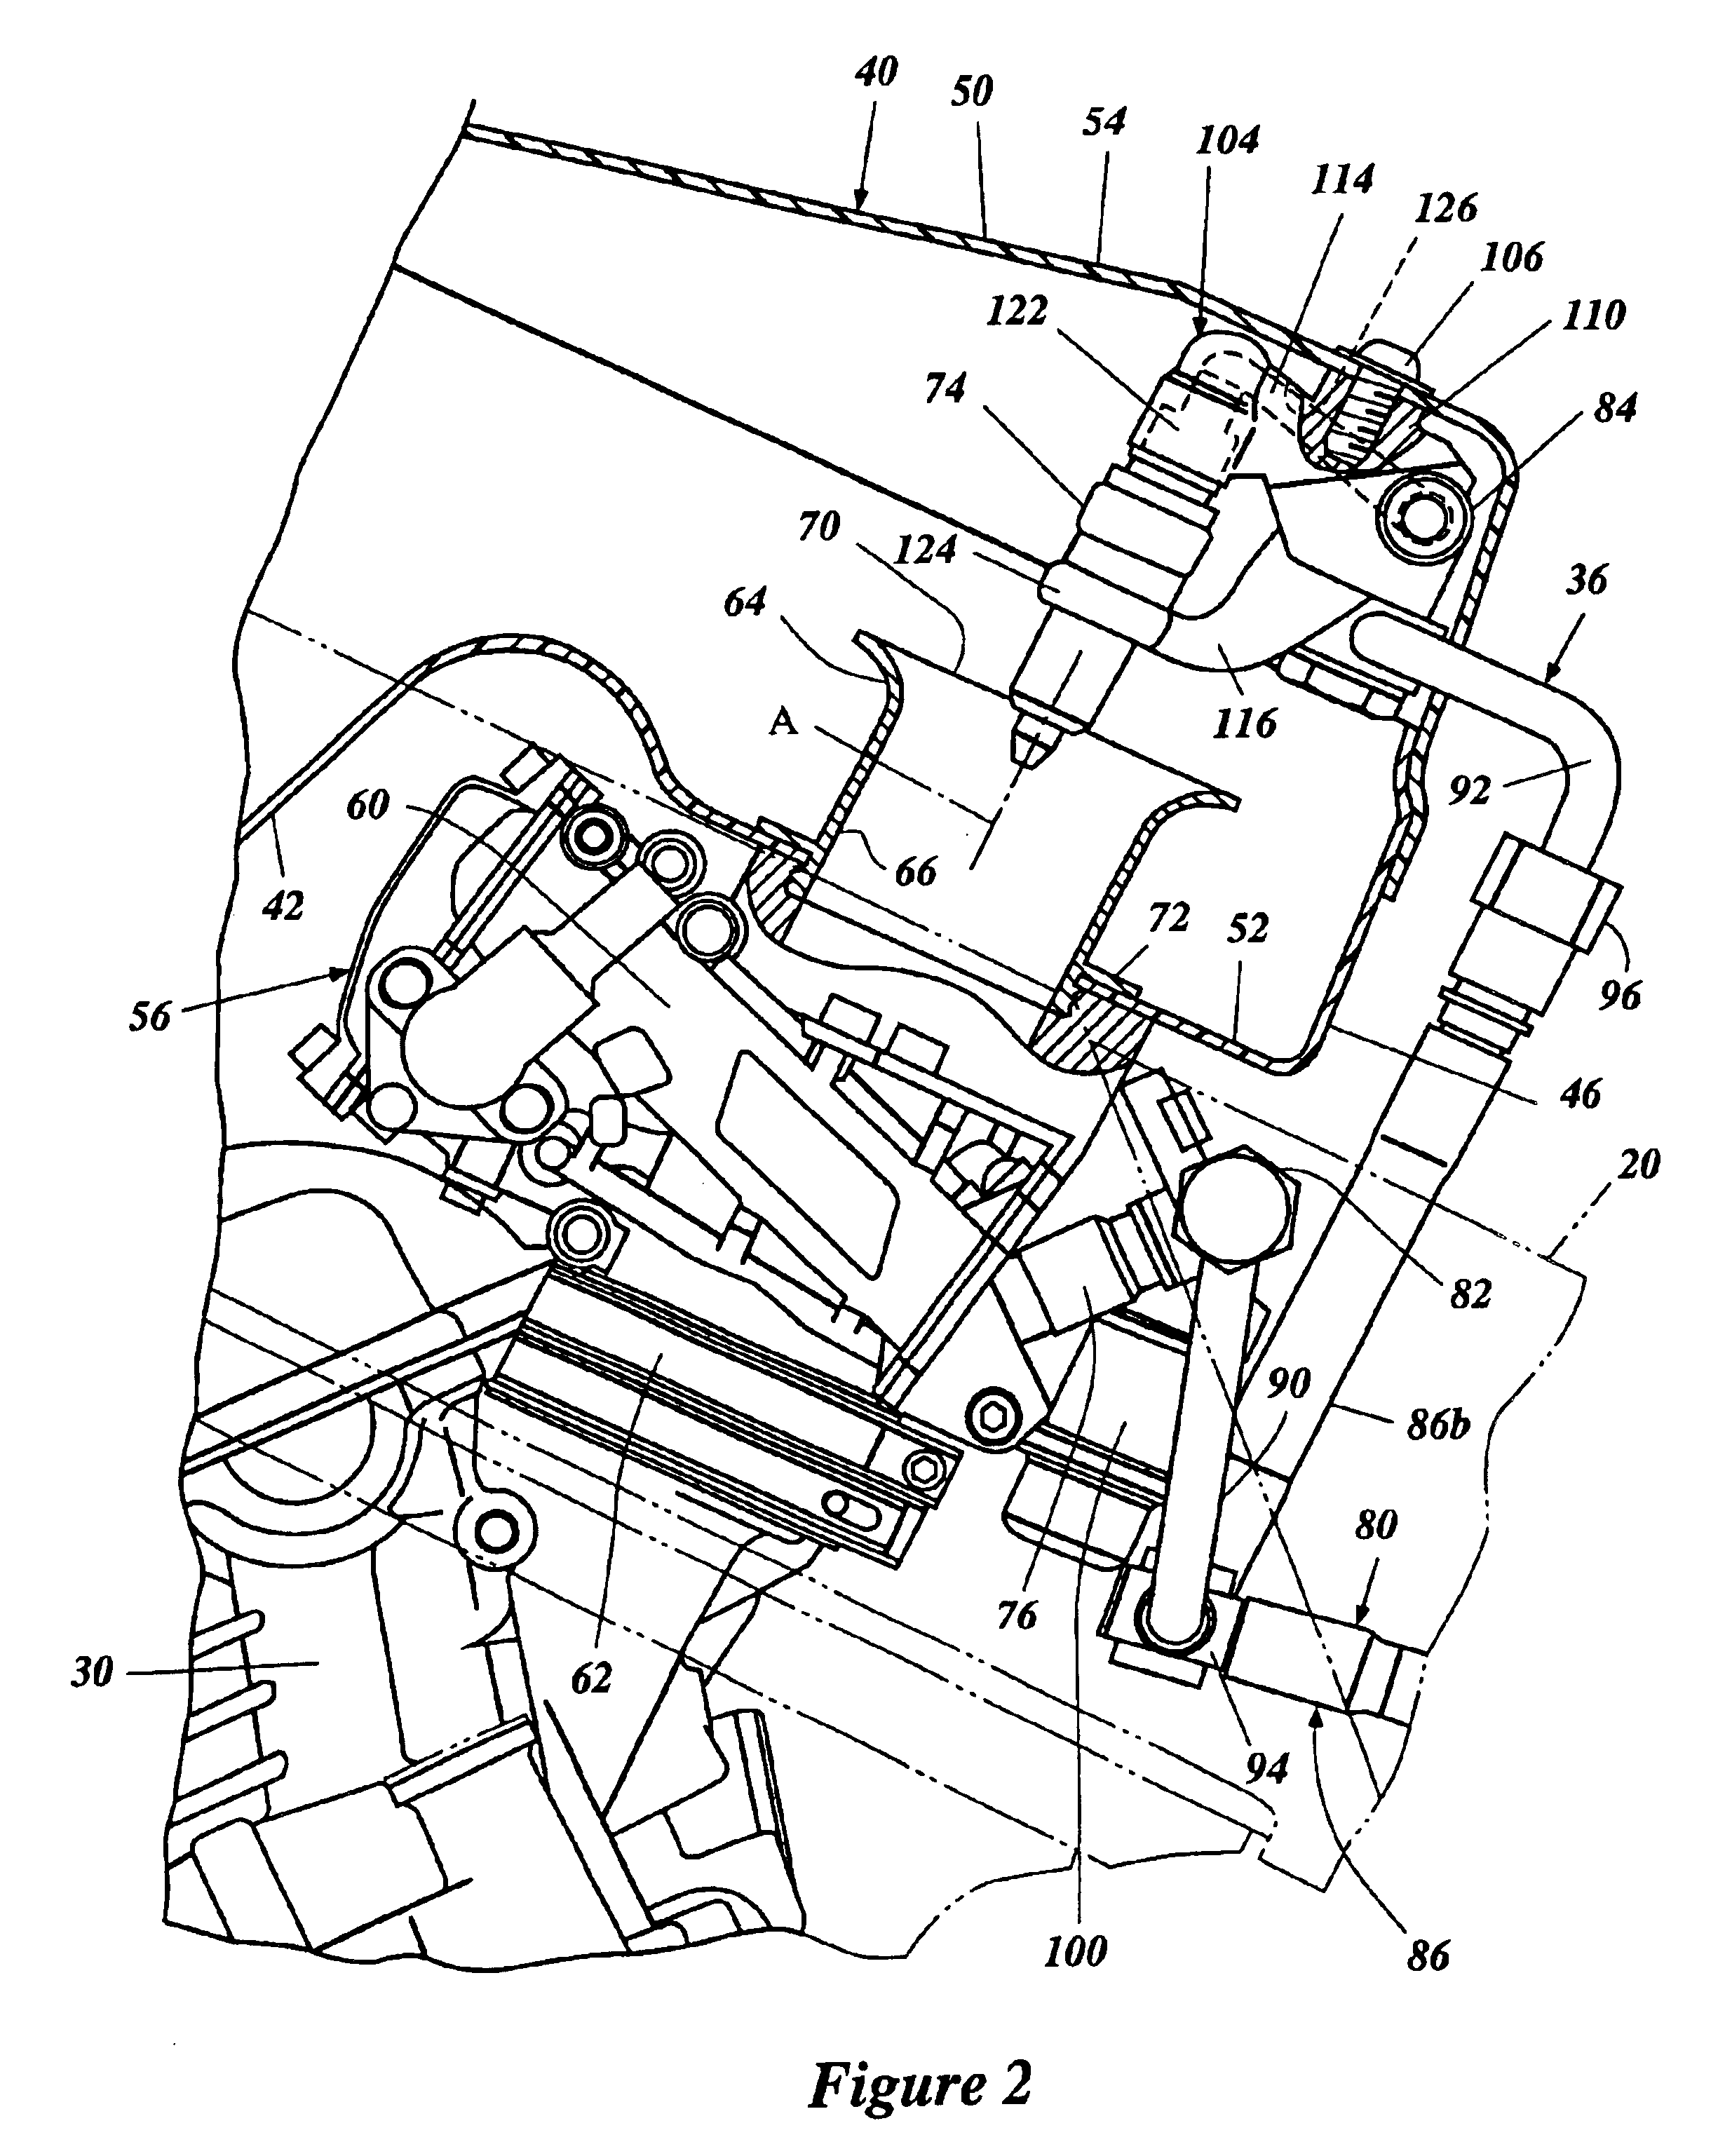 Fuel supply arrangement for a motorcycle engine